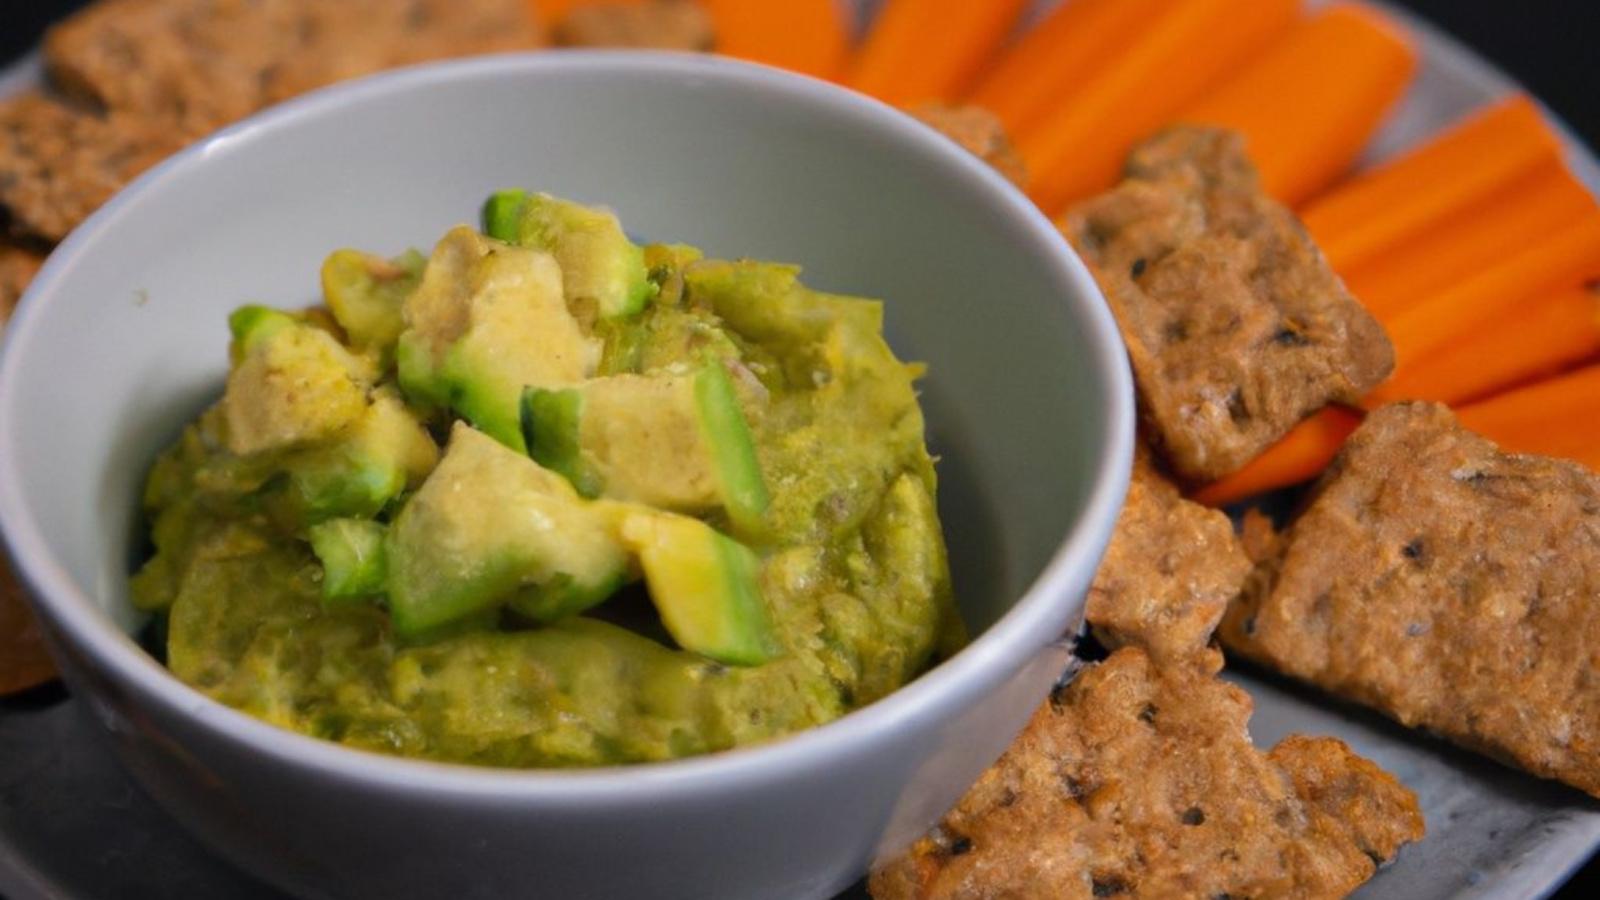 A pea and avocado dip with chopped avocado on top surrounded by whole grain crackers and carrots.